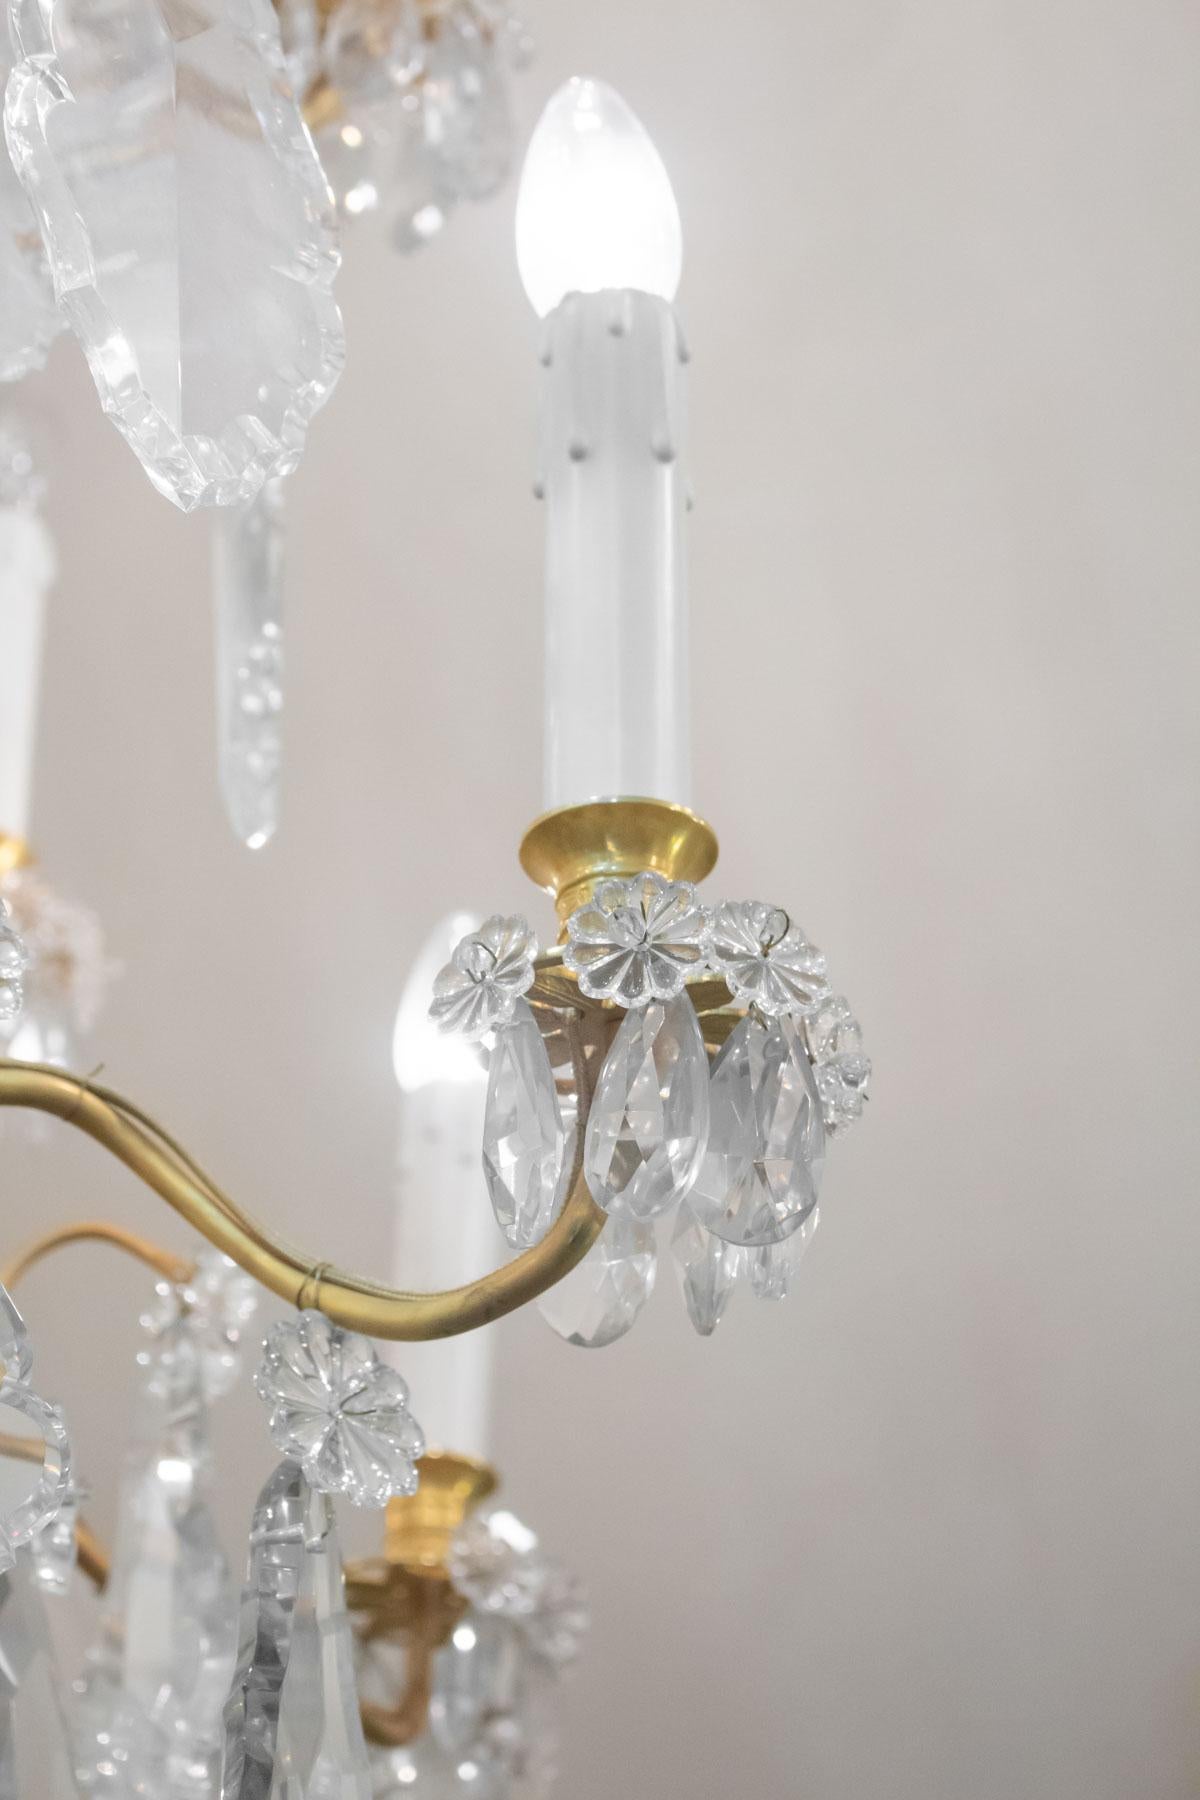 Mid-20th Century Spectacular Pair of Chandeliers, 1930-1940 Gilt Bronze and Crystal